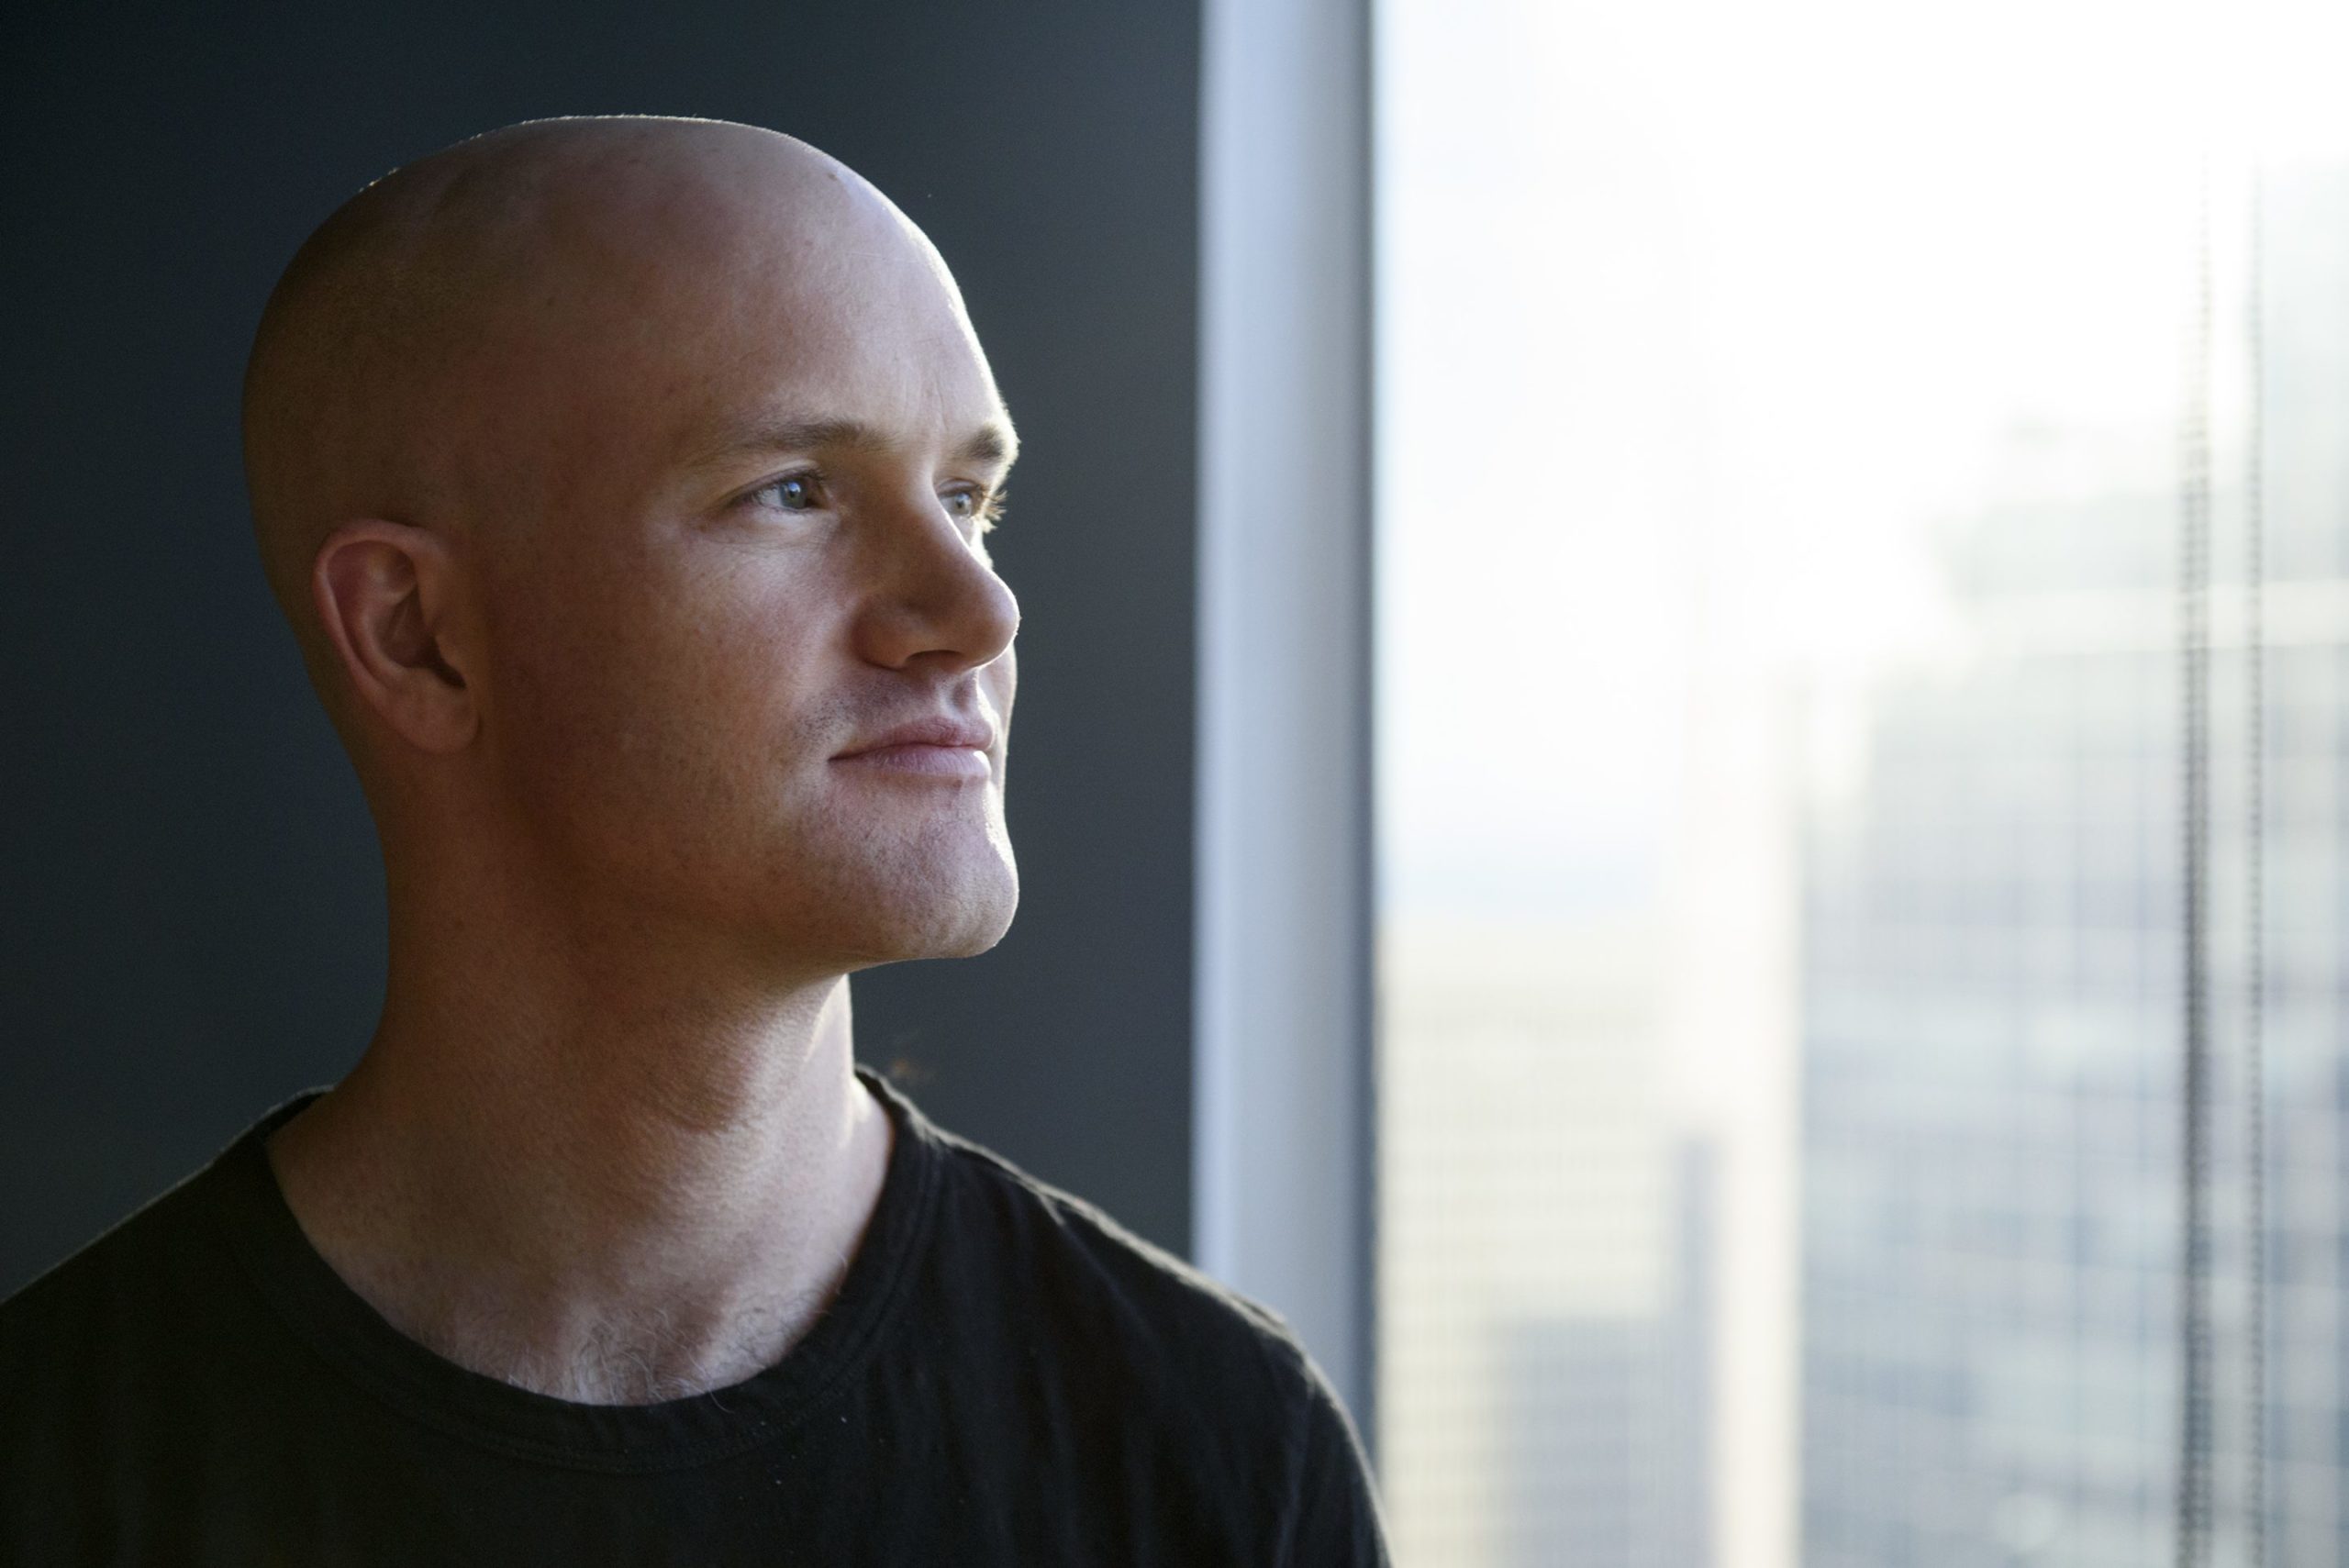 ‘Quit and find a company to work at that you believe in!’: Brian Armstrong responds to petition that calls for ouster of Coinbase execs